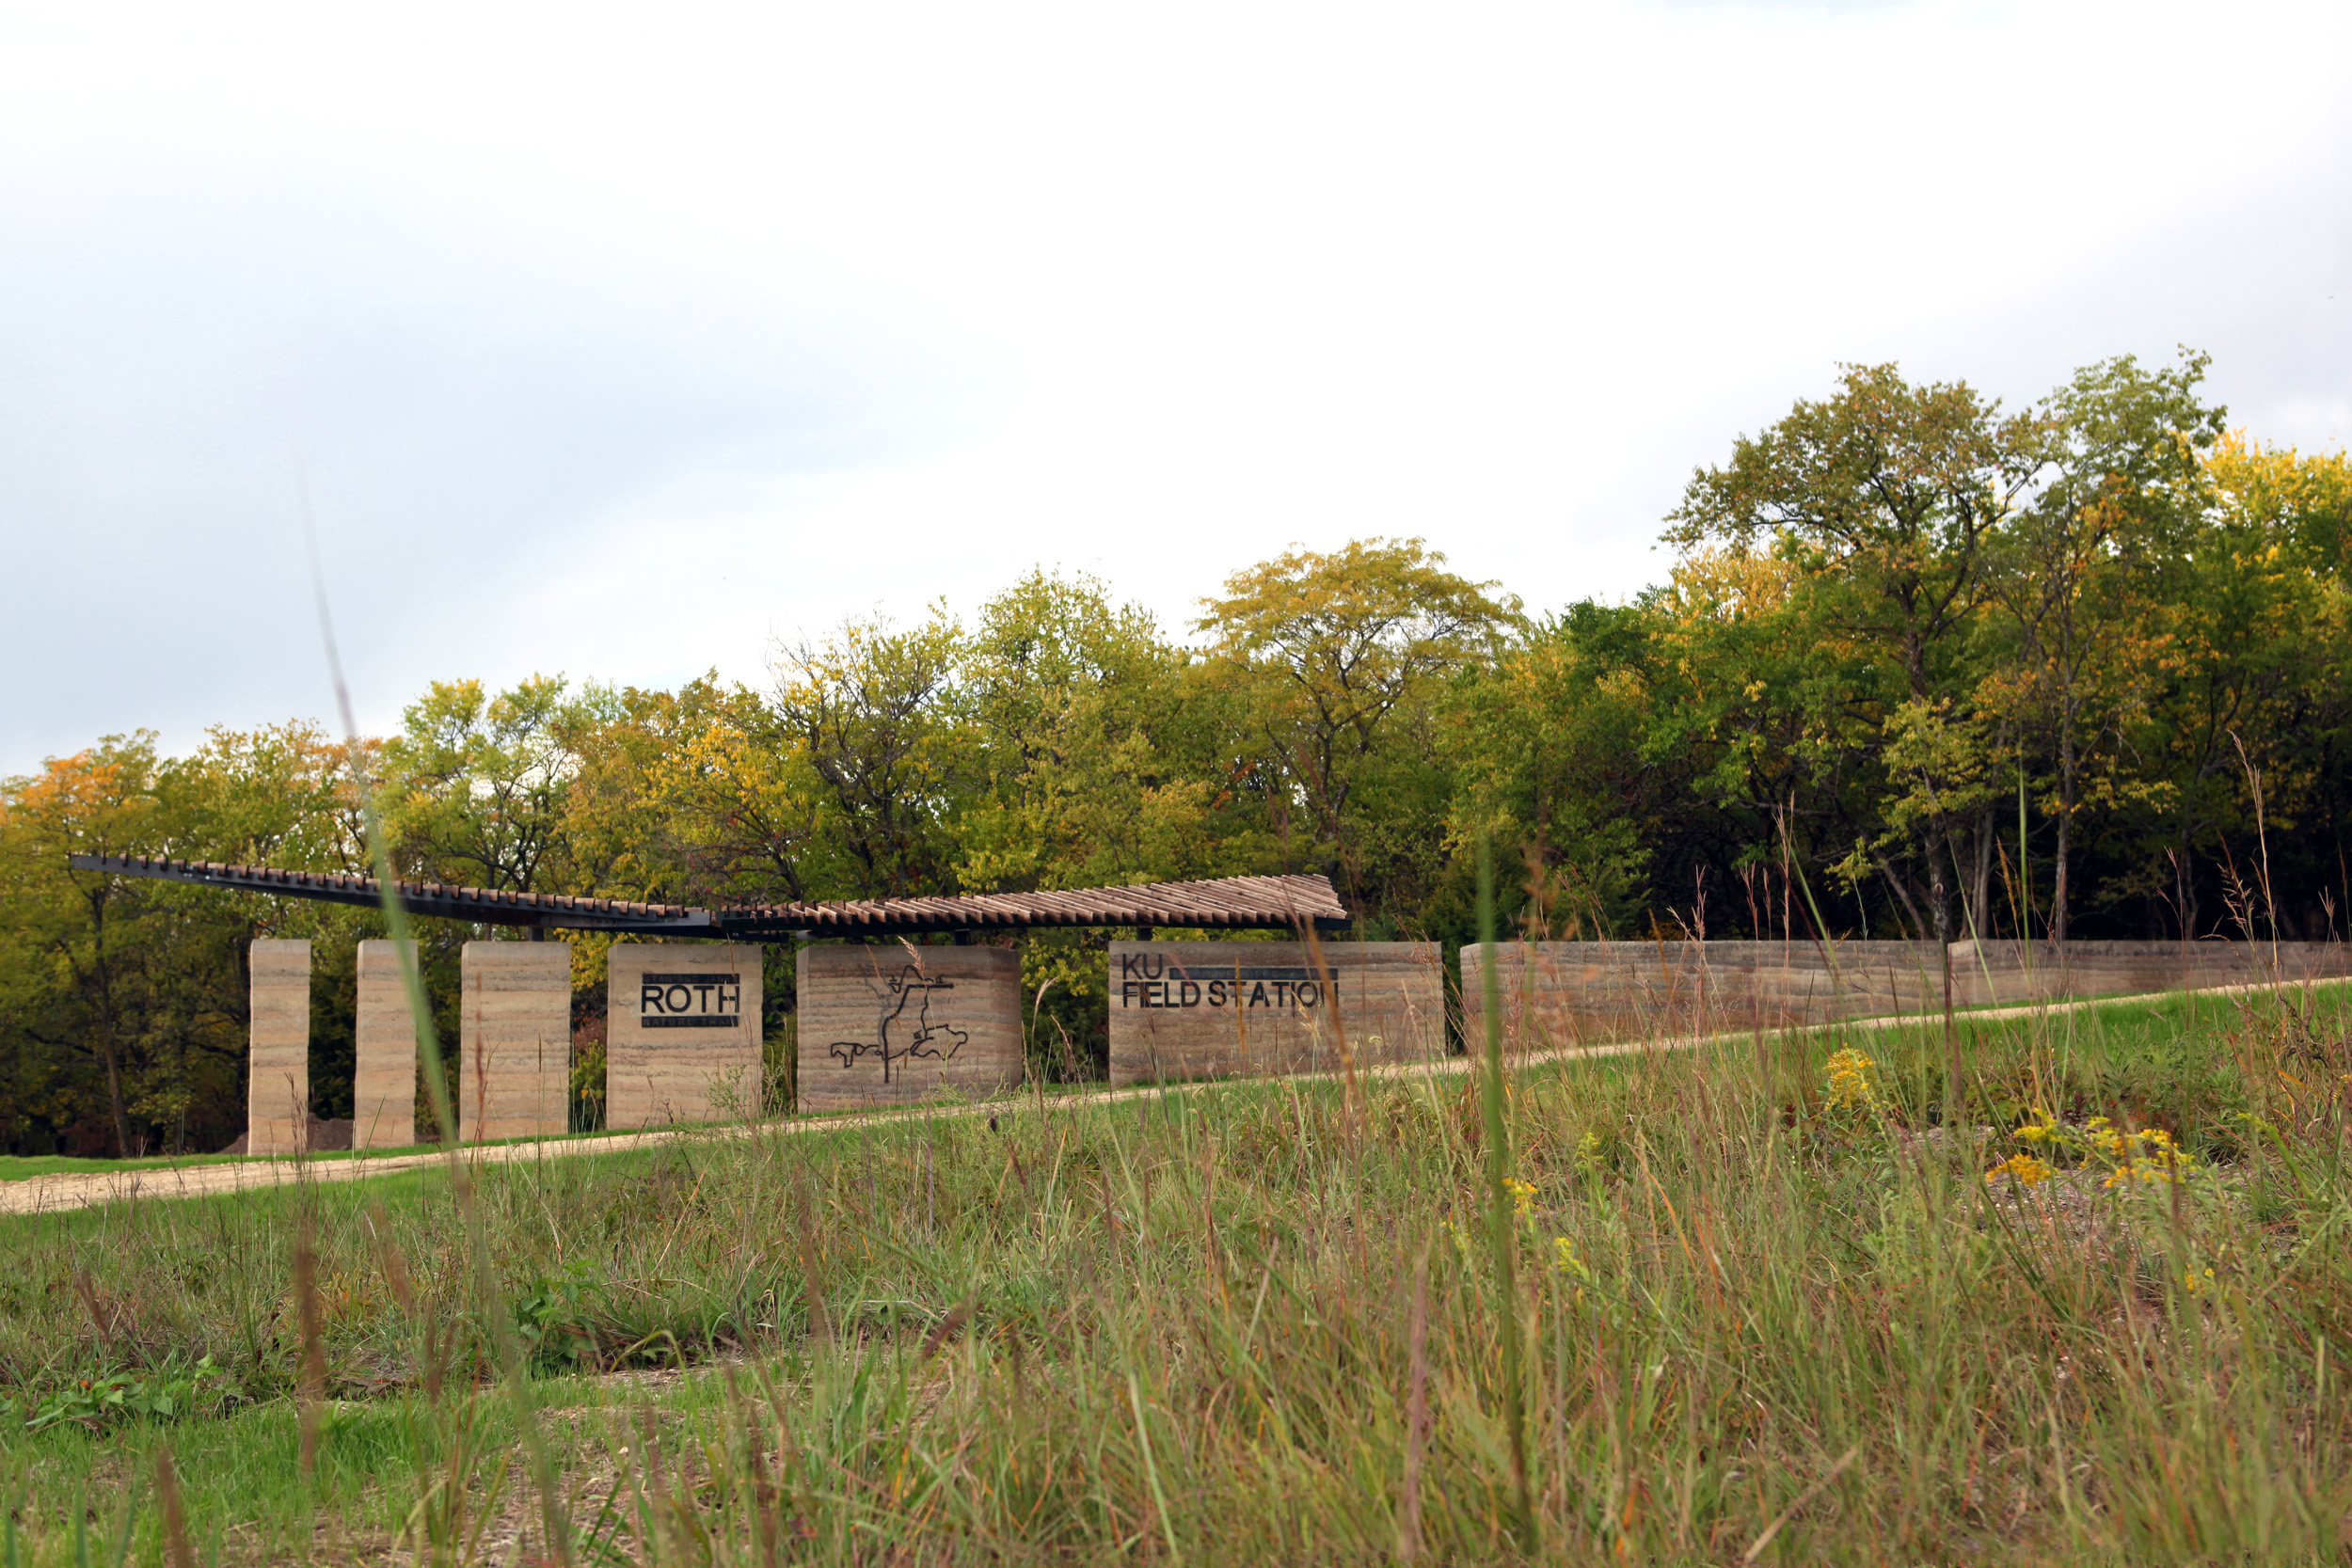 Roth Trailhead, a rammed earth wall registers the vastness of the prairie